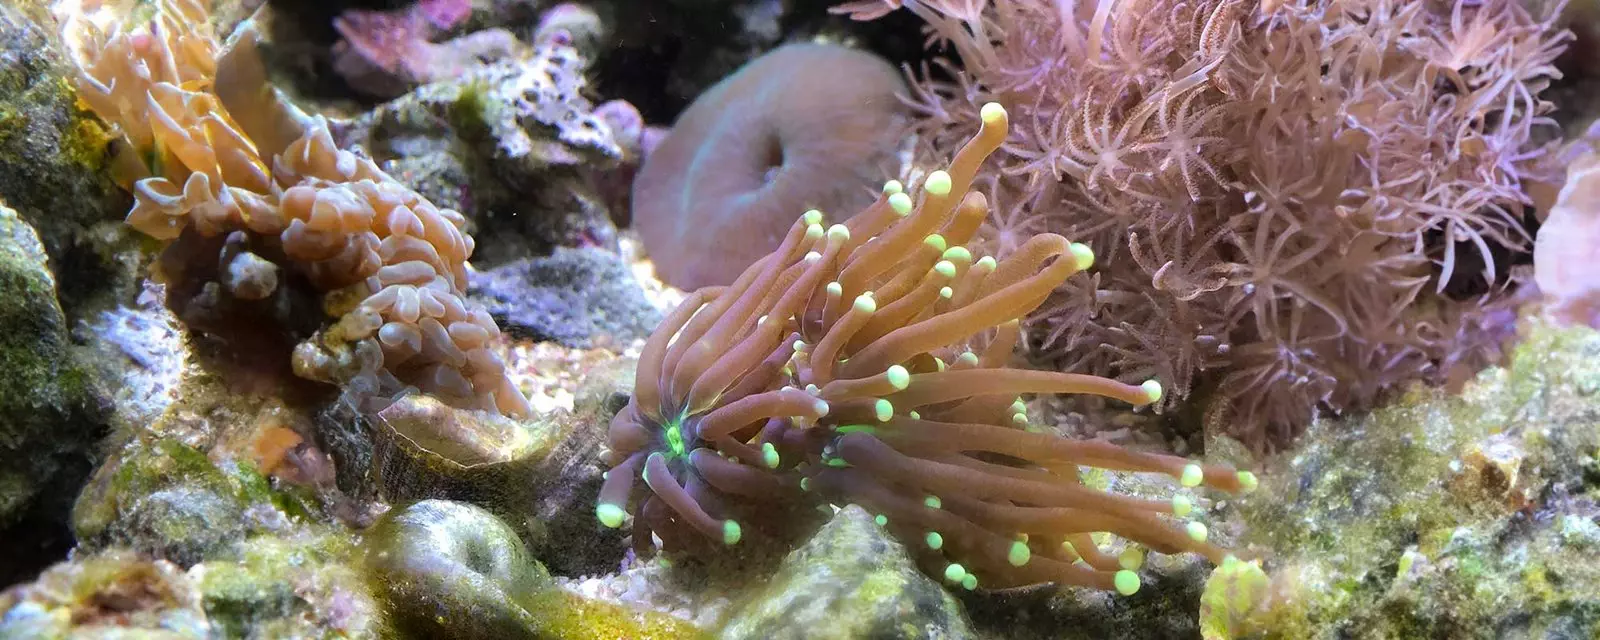 Green Tip Torch Coral (Euphyllia glabrescens)